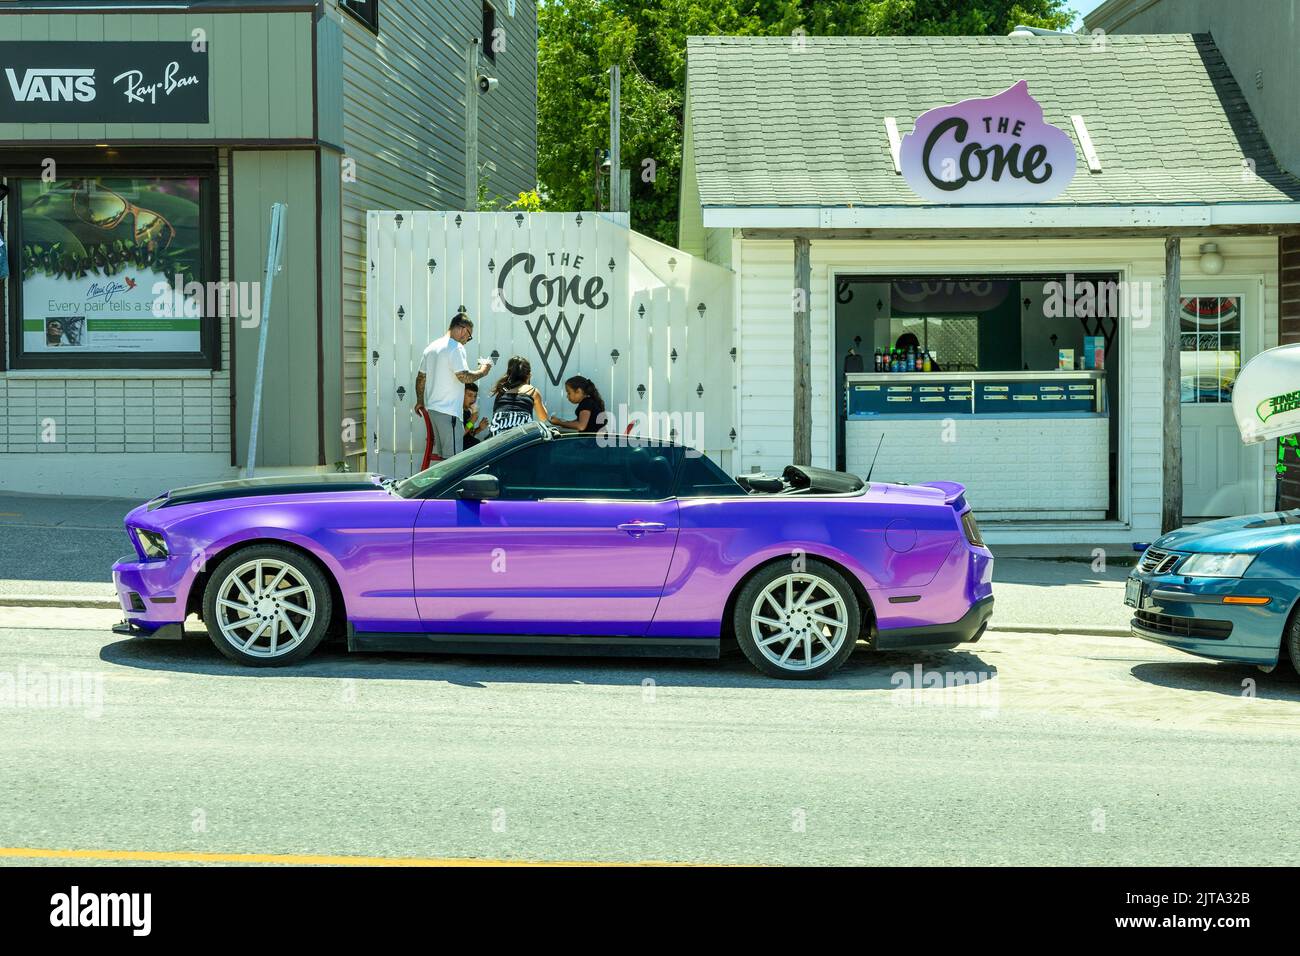 Custom Purple Paint On A Ford Mustang Convertible Outside The Cone Ice Cream Shop In Sauble Beach Ontario Canada Custom Car Automobile Stock Photo